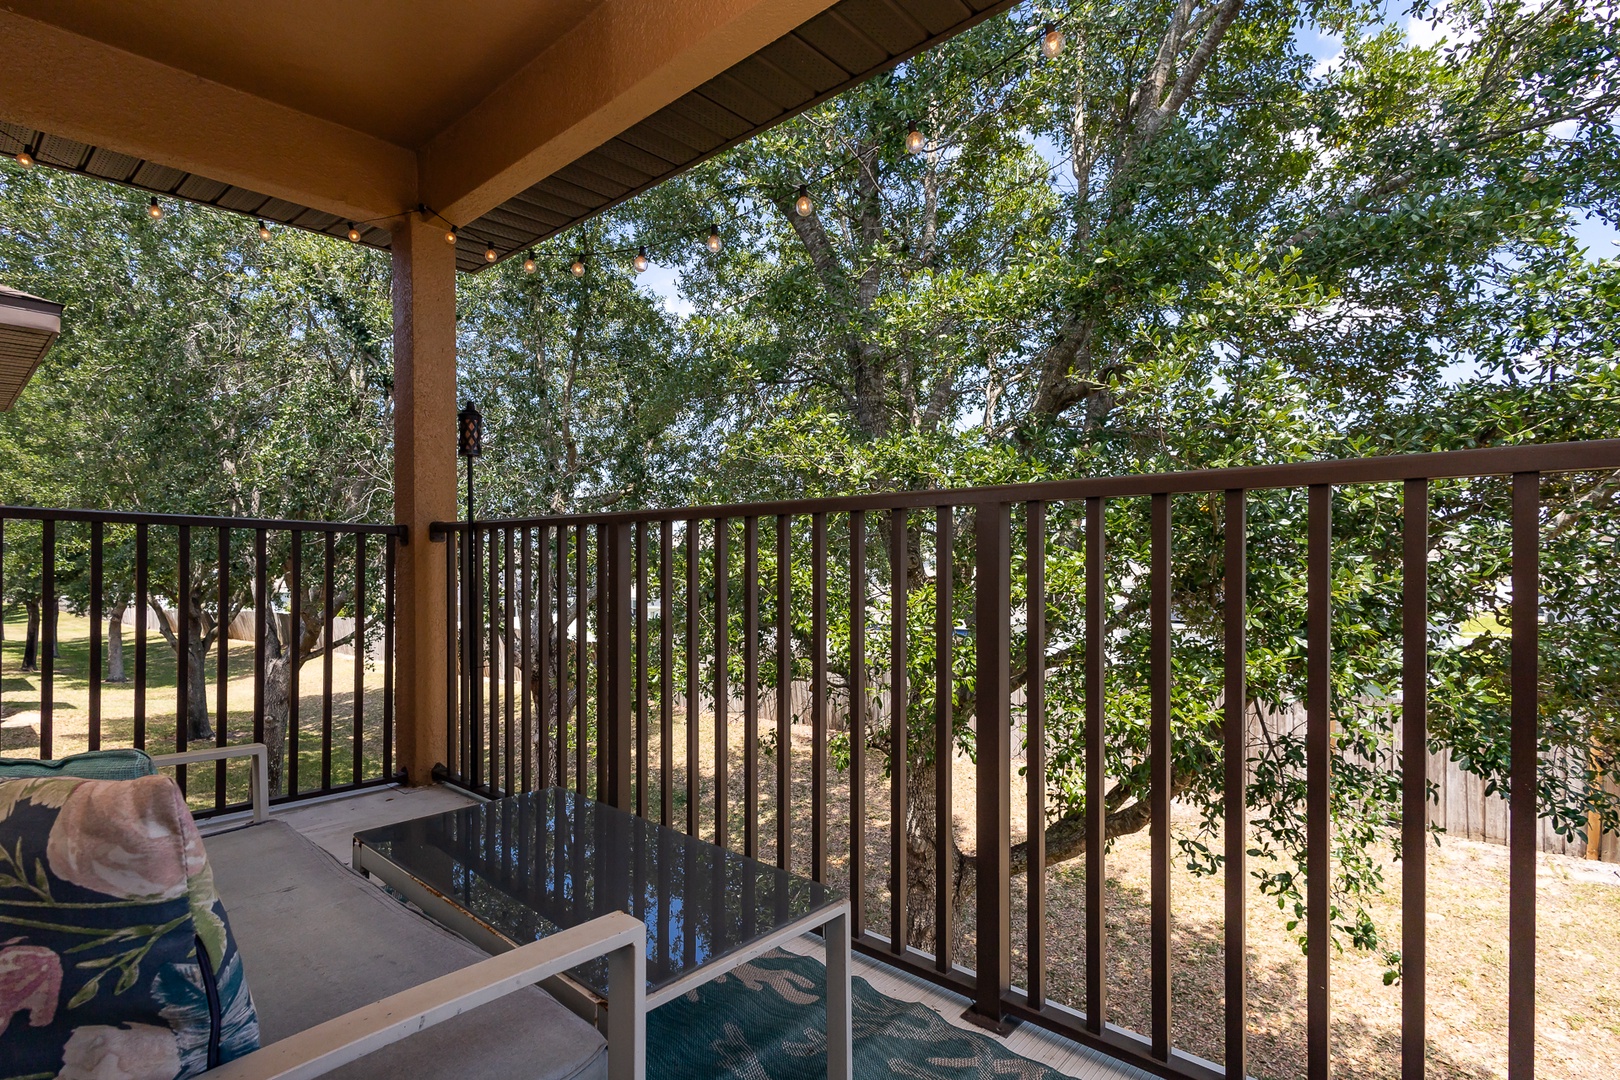 Step out onto the upper-level balcony & unwind in the shade